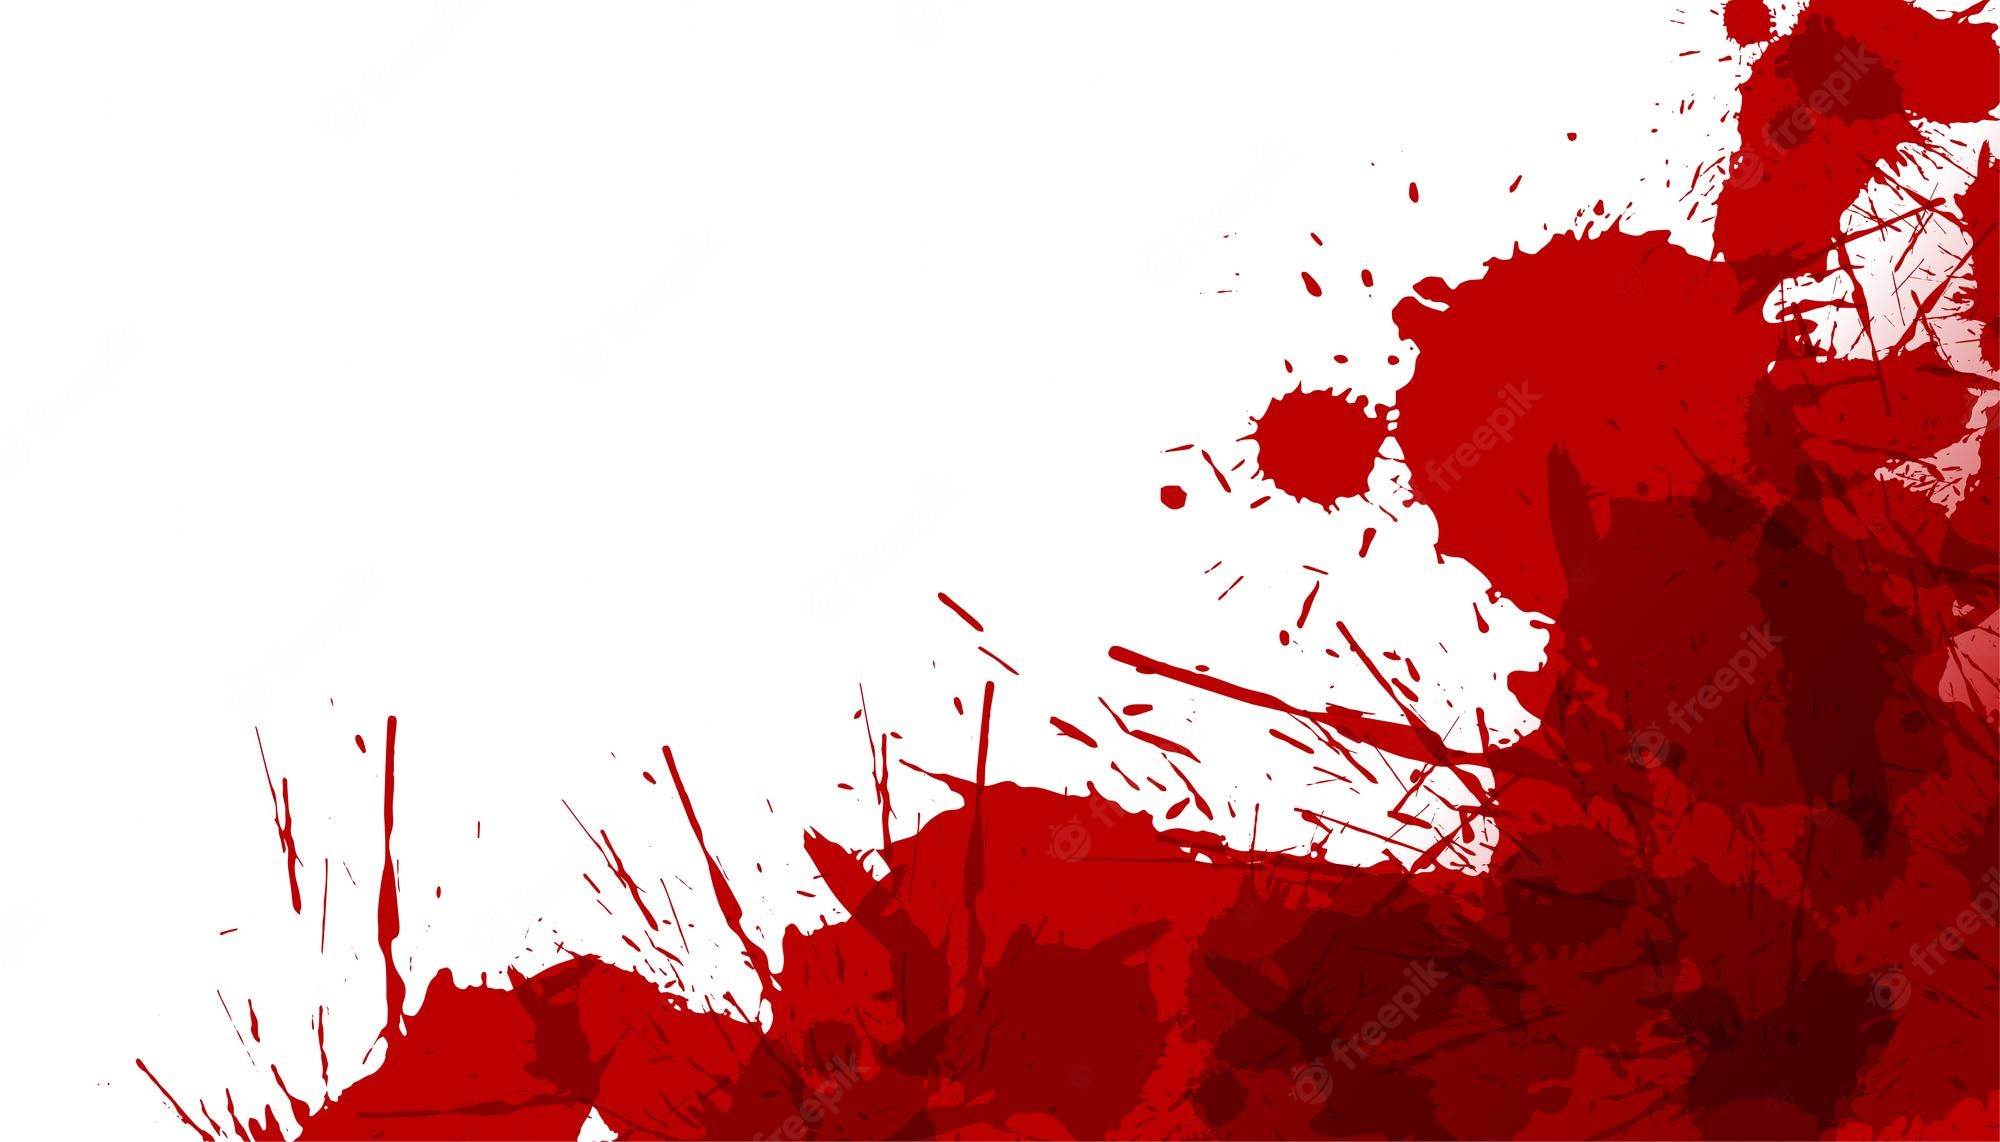 Dripping Blood Image. Free Vectors, & PSD